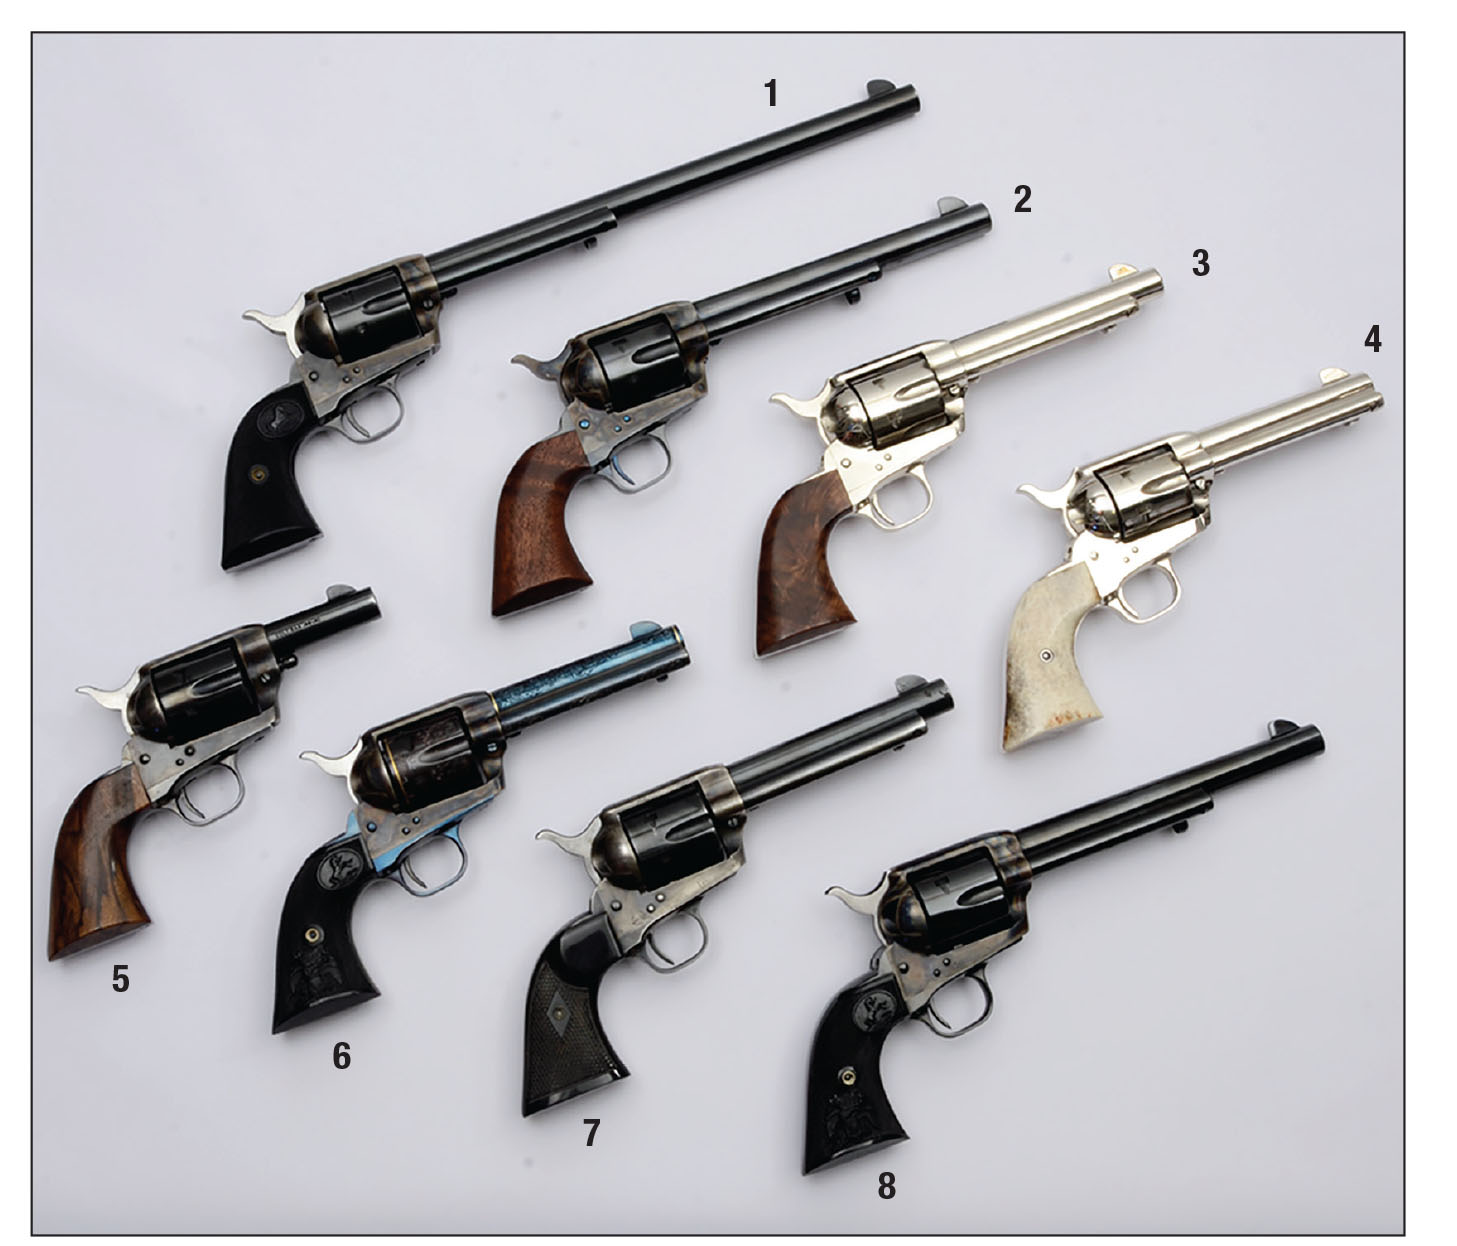 Mike’s Colt revolvers used for a barrel length comparison. Top row: .45 barrel lengths are (1) 12 inches, (2) 7½ inches, (3) 5½ inches and (4) 4¾ inches. Bottom row: .44-40 barrel lengths are (5) 3 inches, (6) 4¾ inches, (7) 5½ inches and (8) 7½ inches.